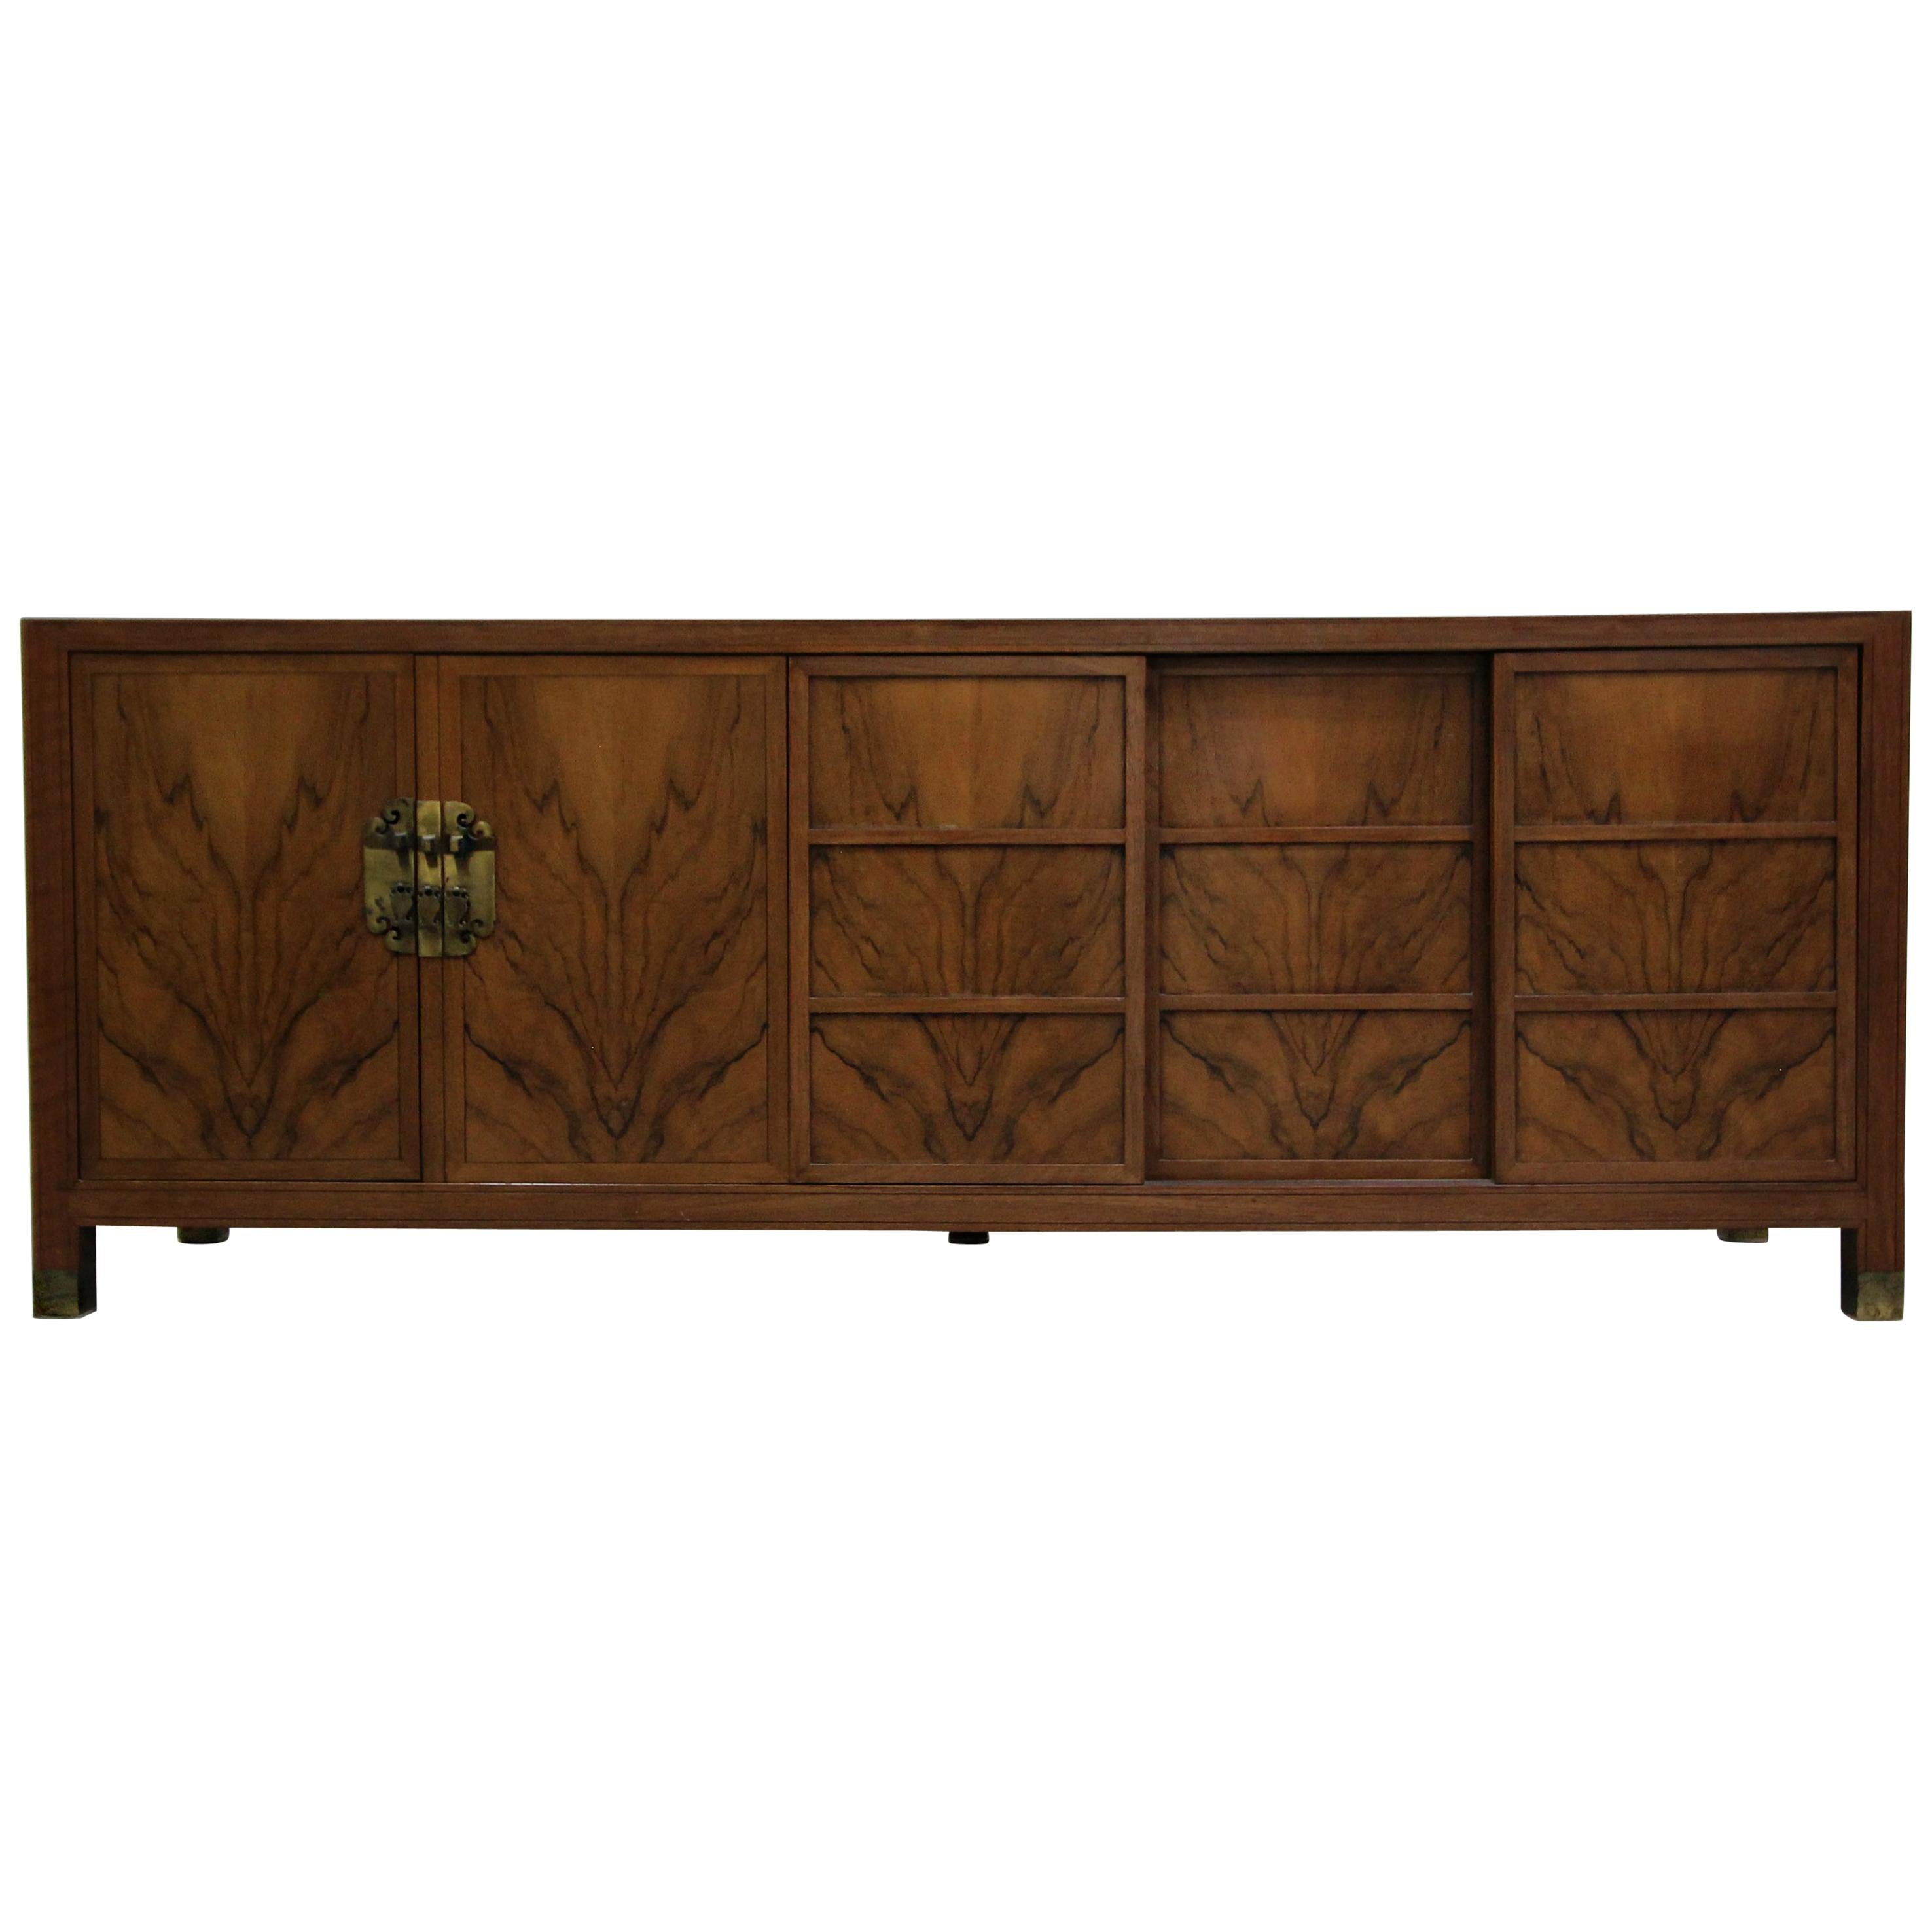 Midcentury Walnut Credenza by Frank Van Steenberg for Baker Far East Collection